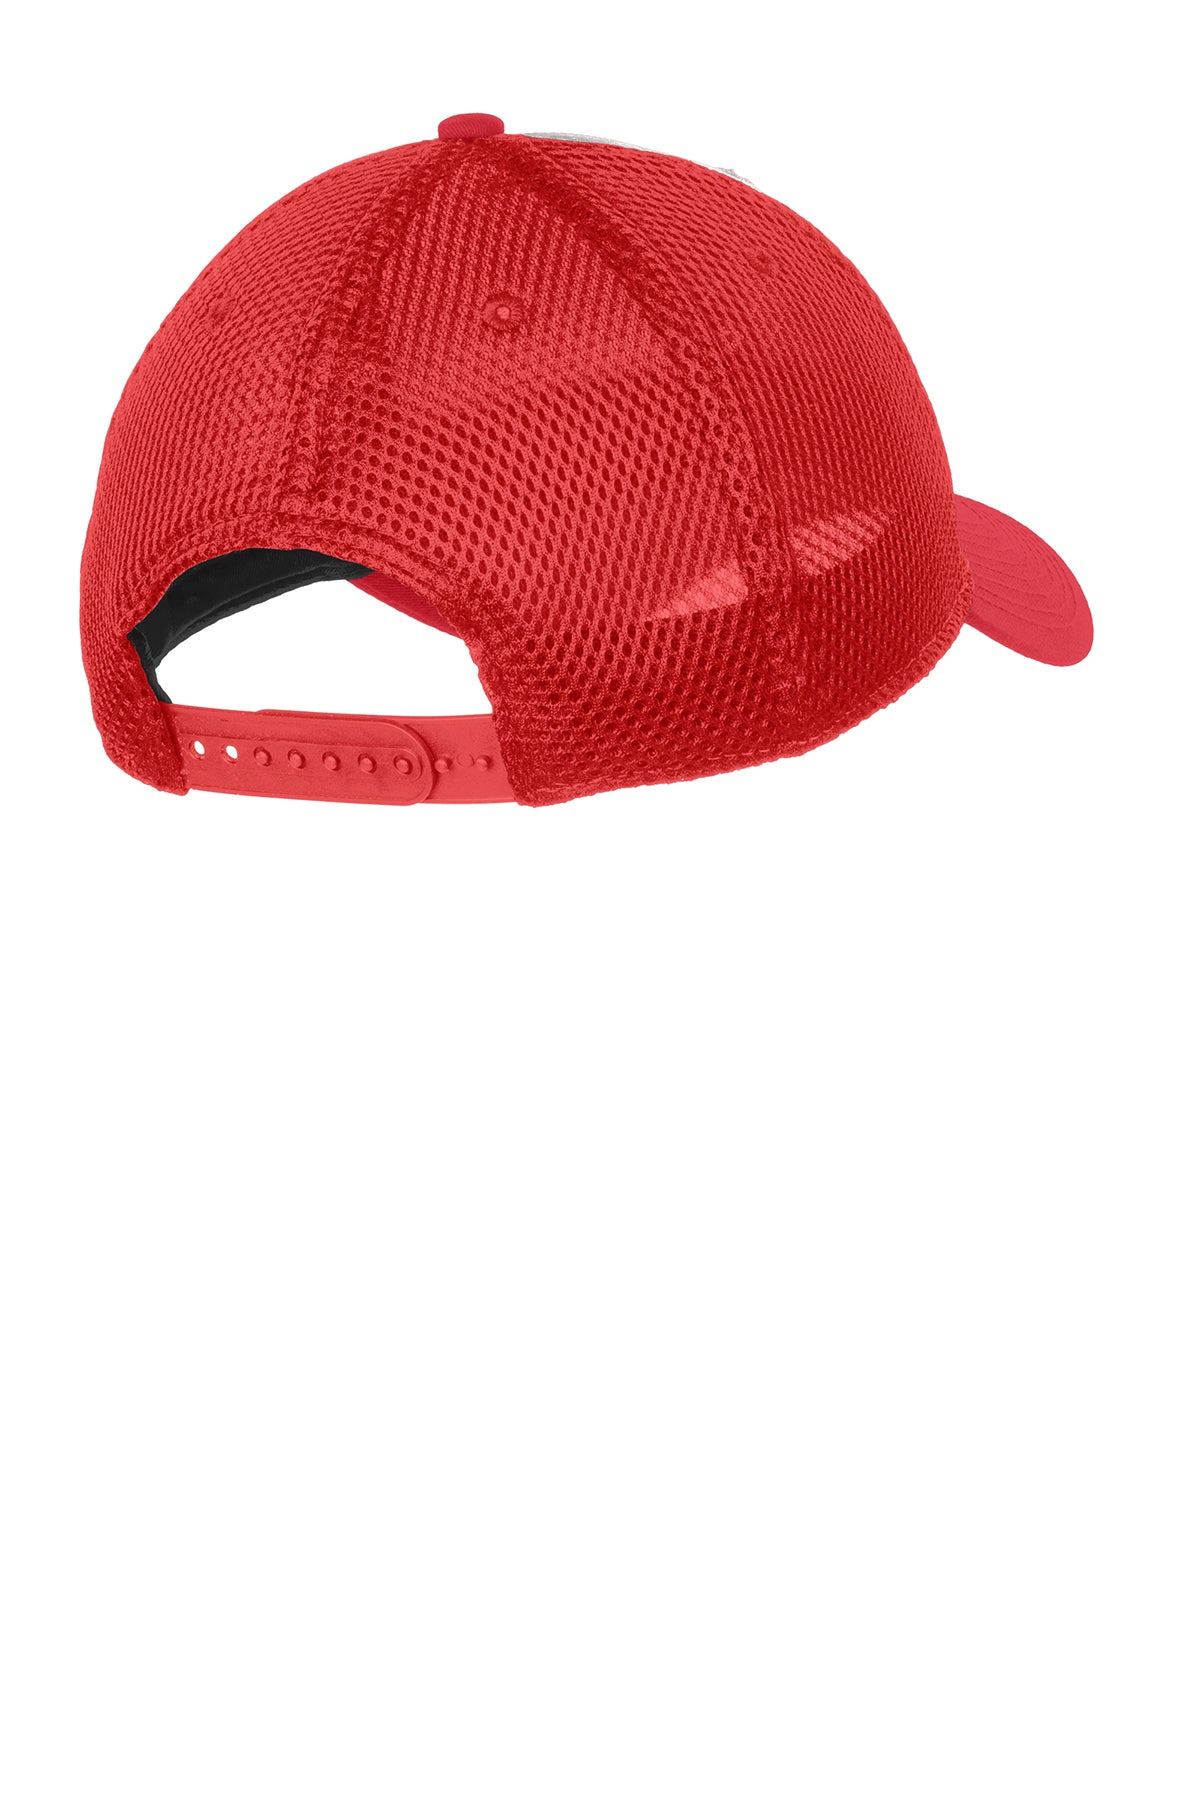 New Era Snapback Contrast Front Mesh Cap, White/Scarlet Red